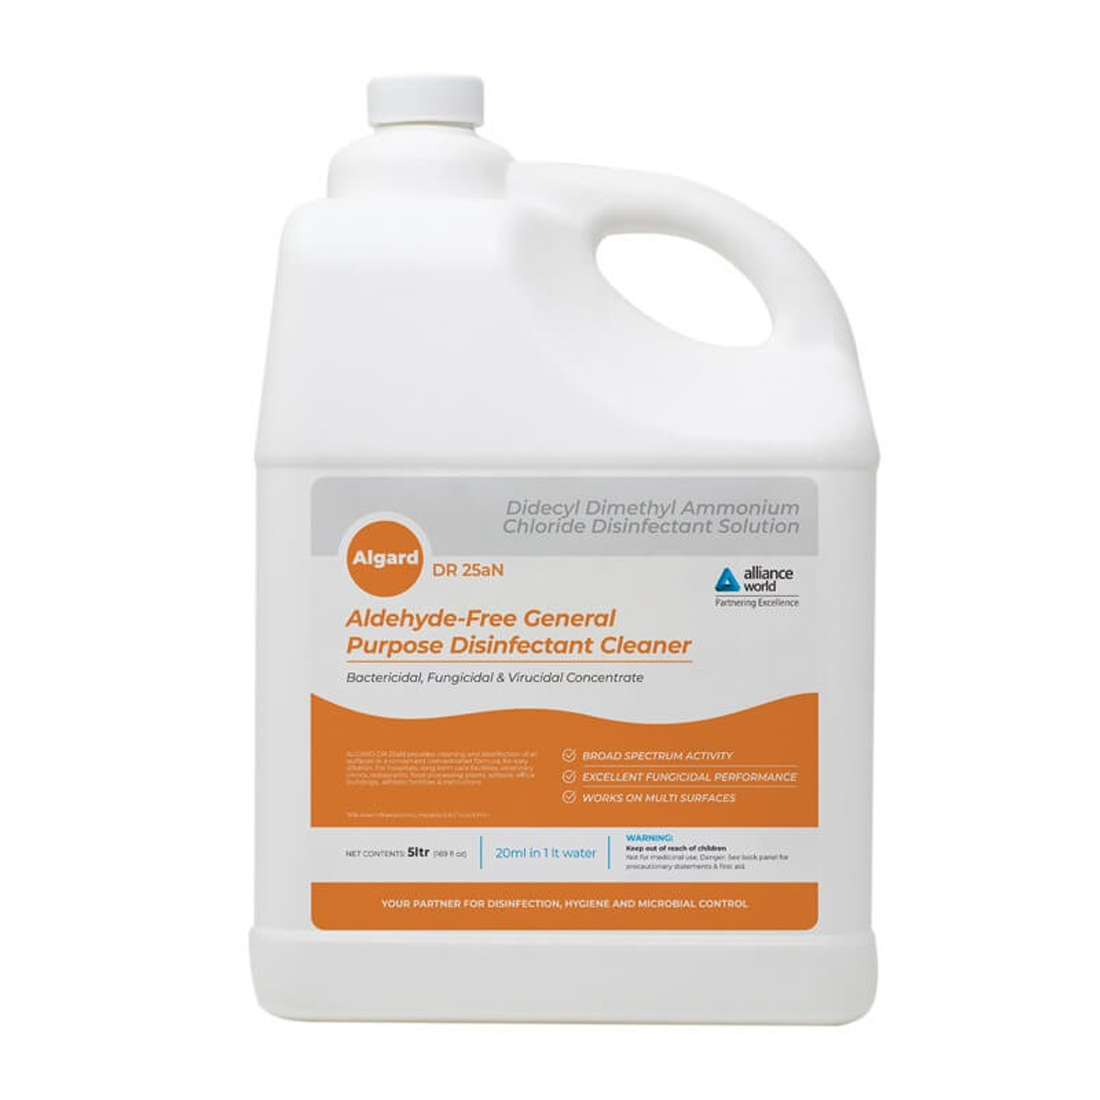 Algard DR 25aN – Aldehyde-Free General Purpose Disinfectant